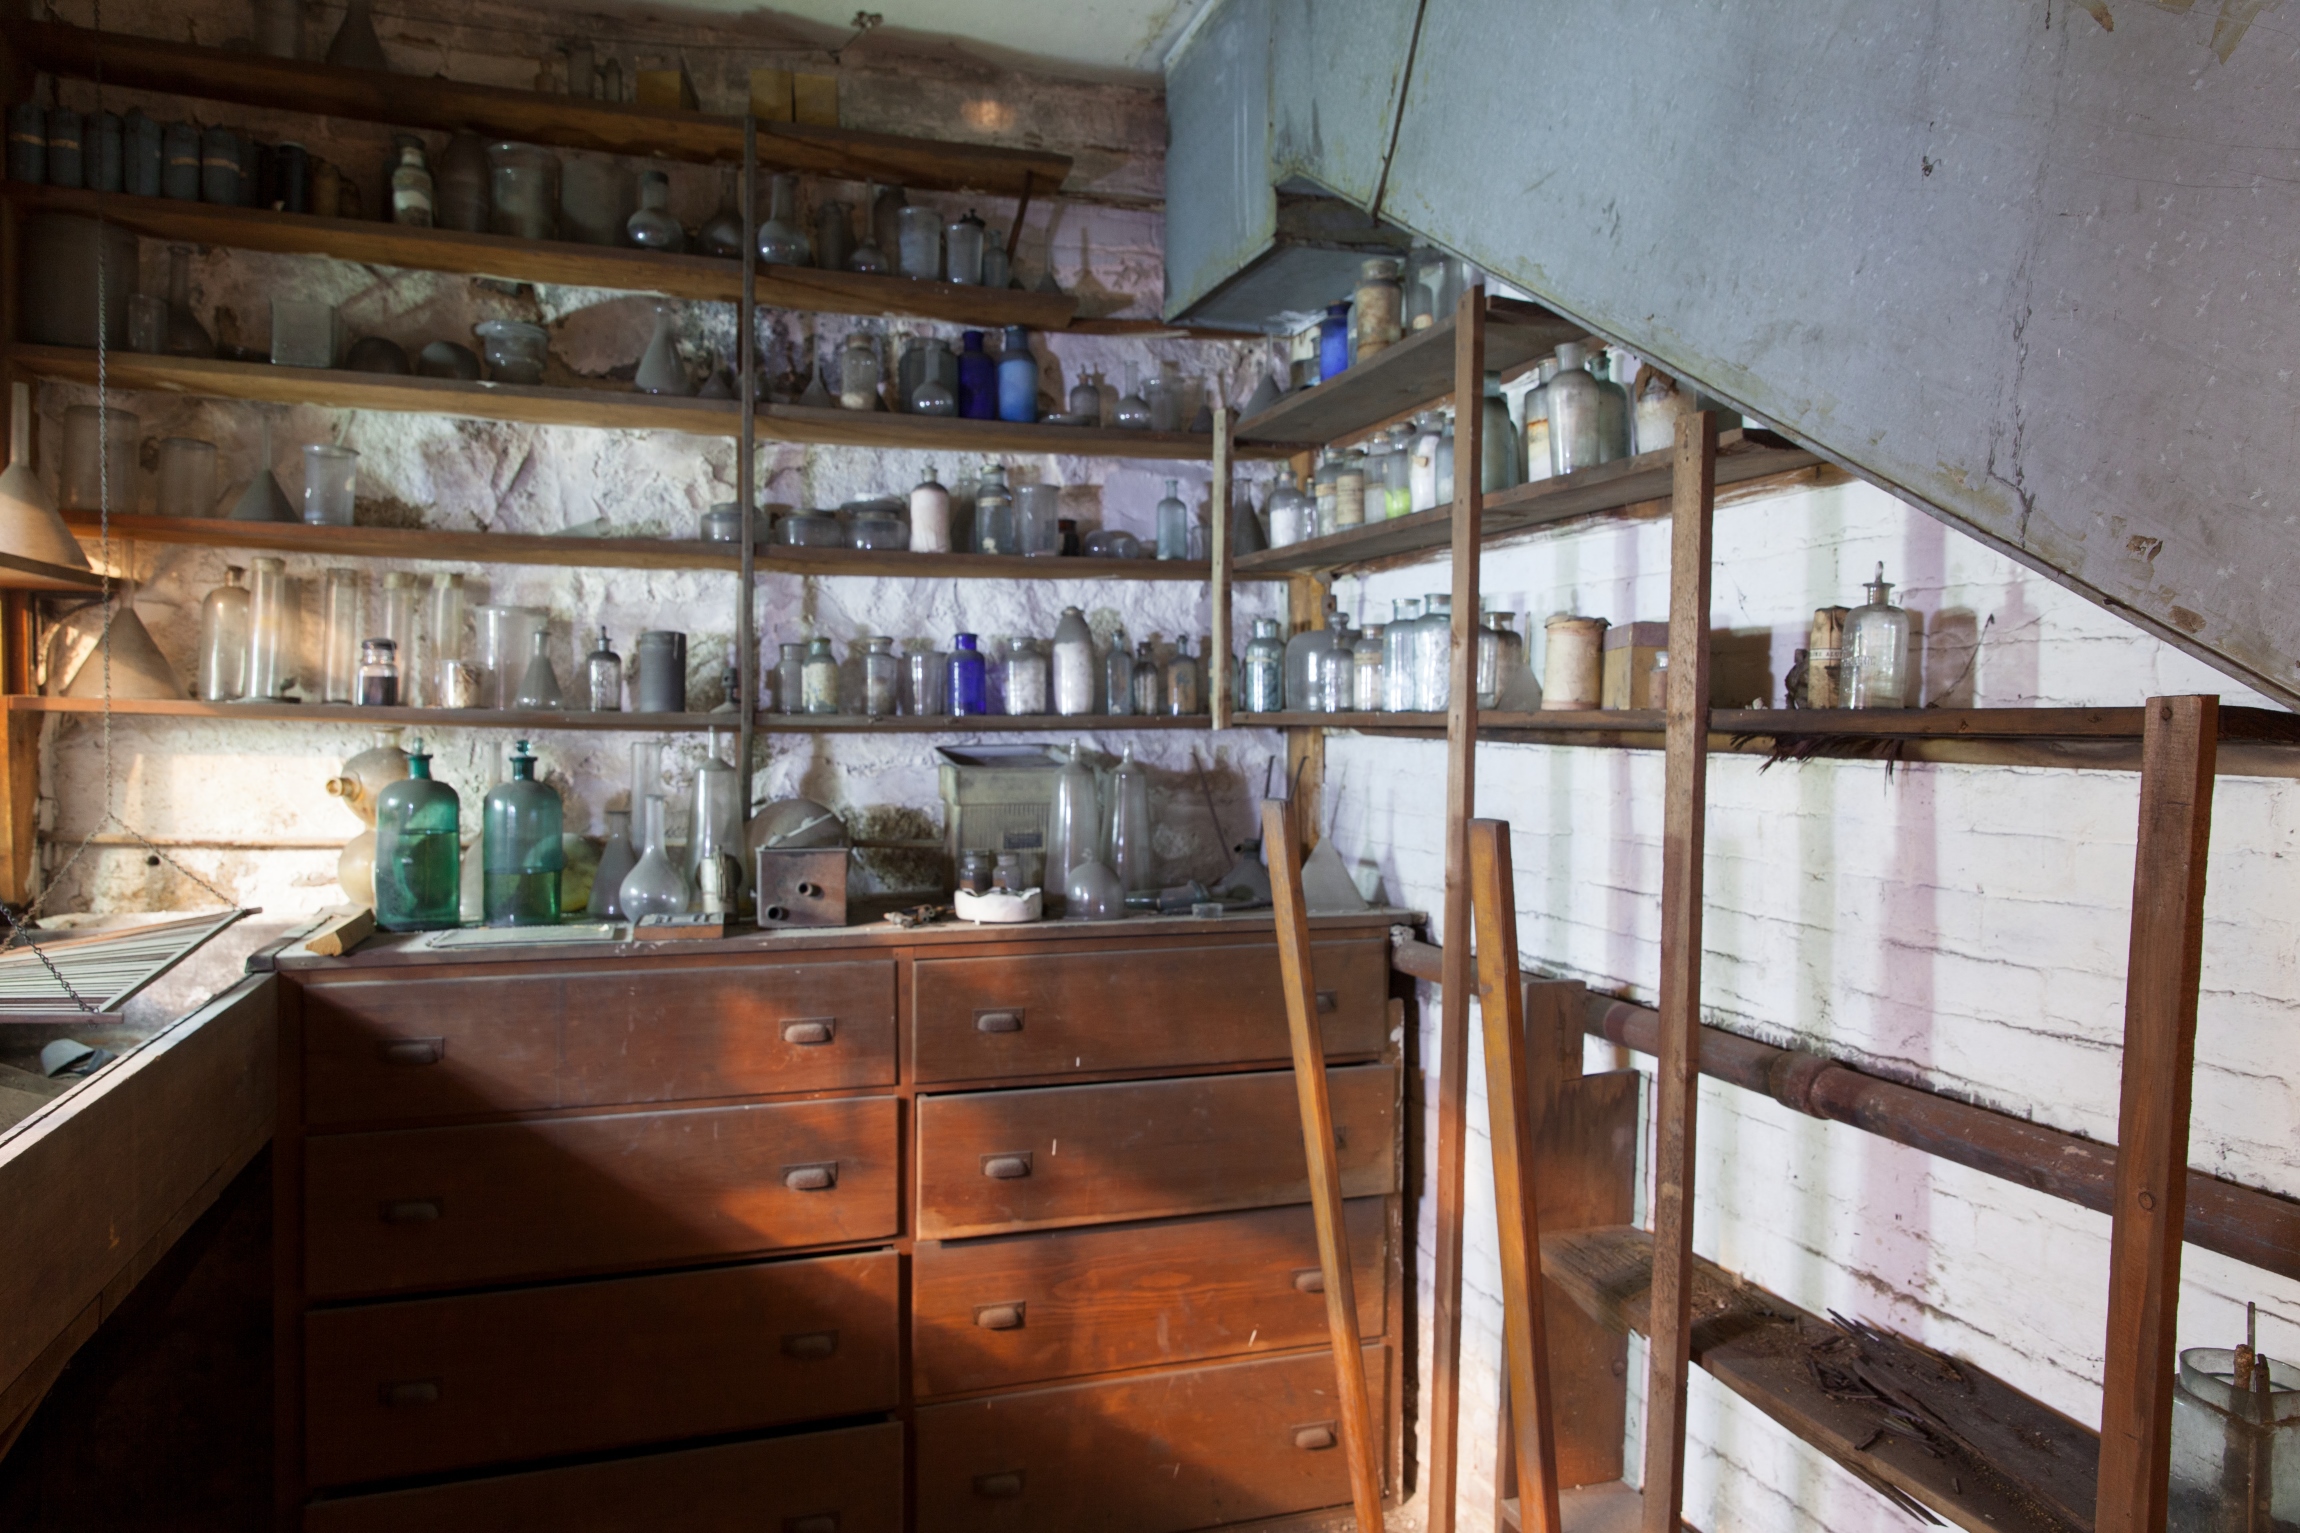 Shelves lined with bottes and vials, above wooden drawers with a metal tub along one side.